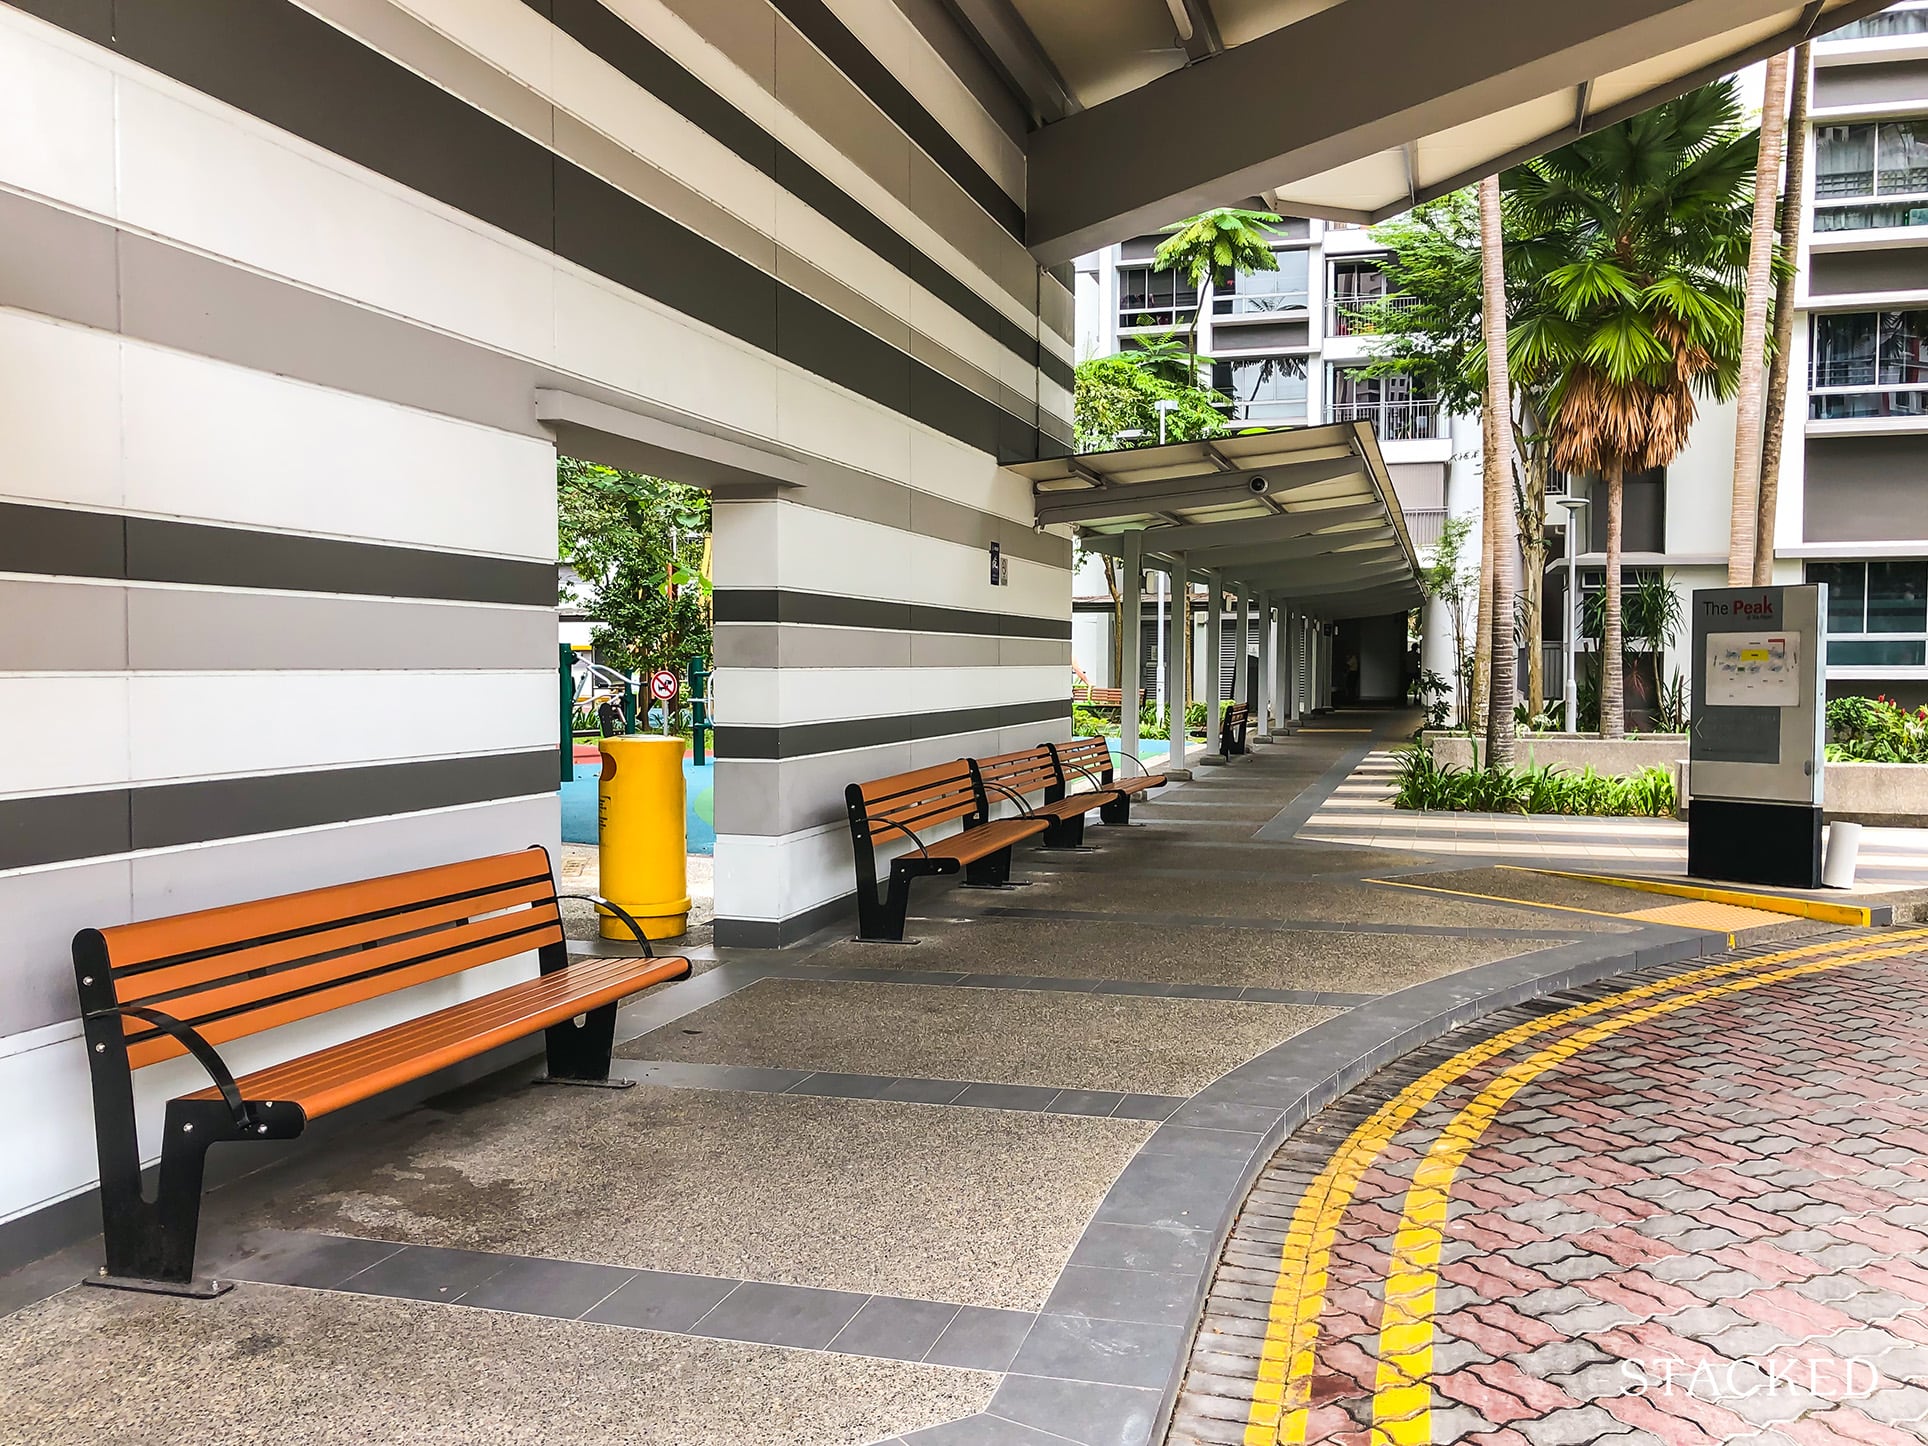 The Peak @ Toa Payoh sheltered seating